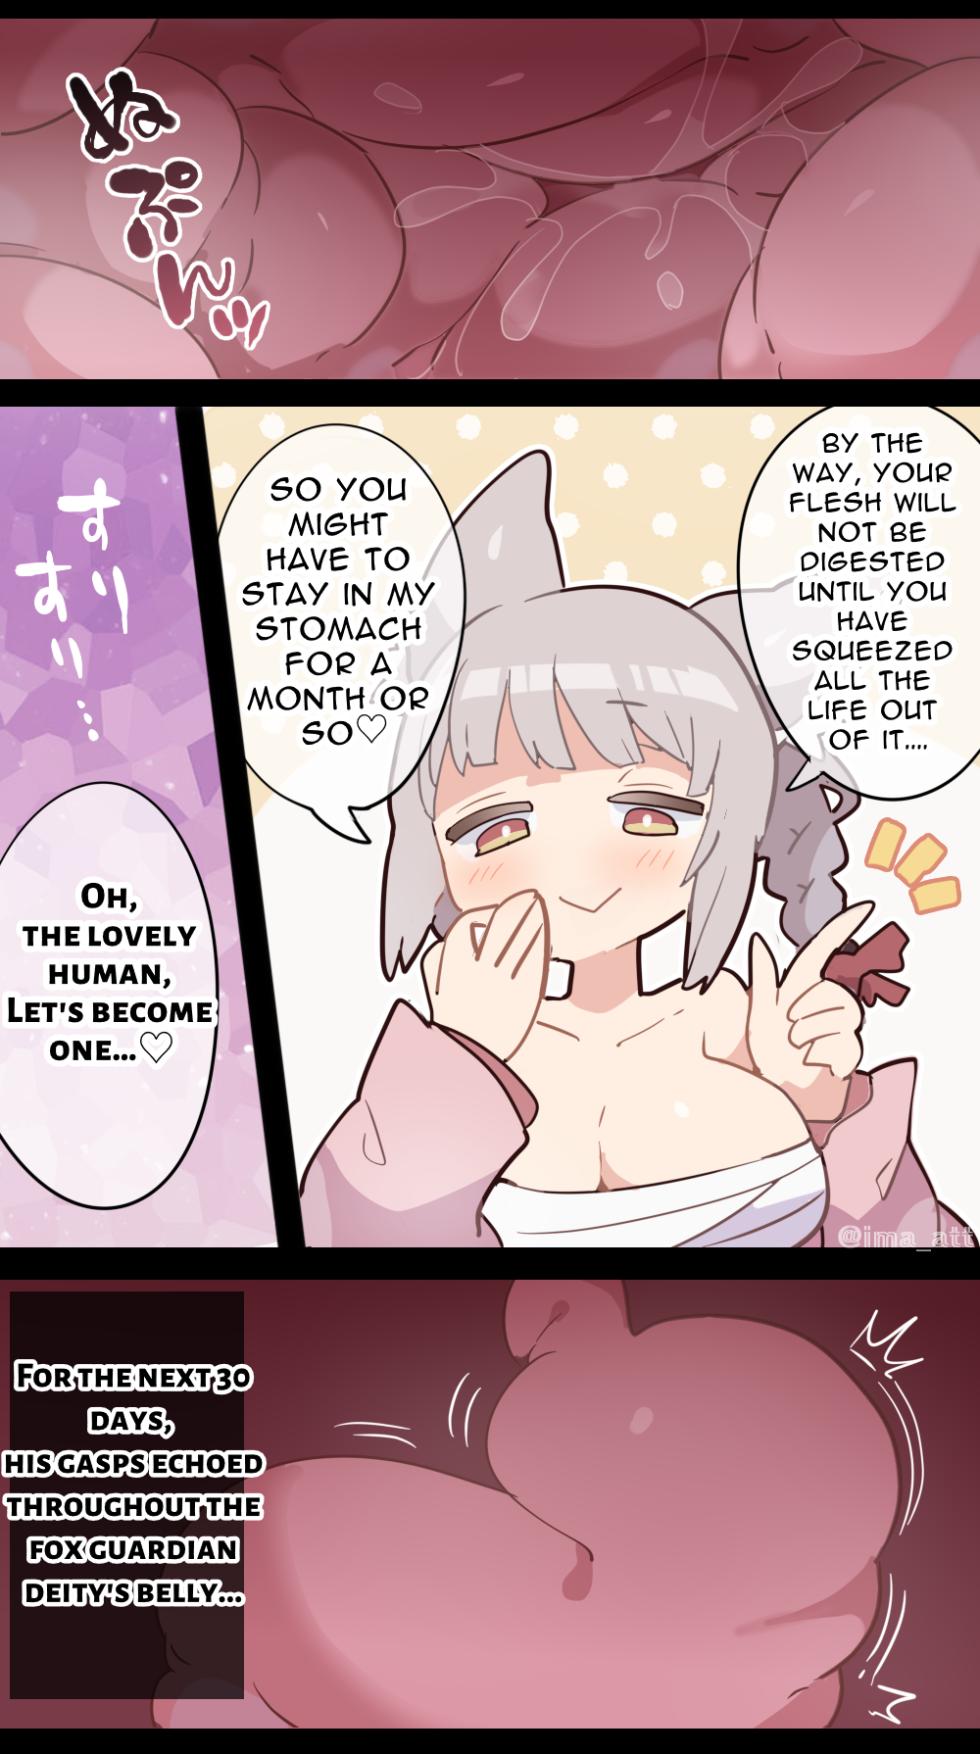 [imaat] Giant Fox Girl VORE [English / Japanese] - Page 5